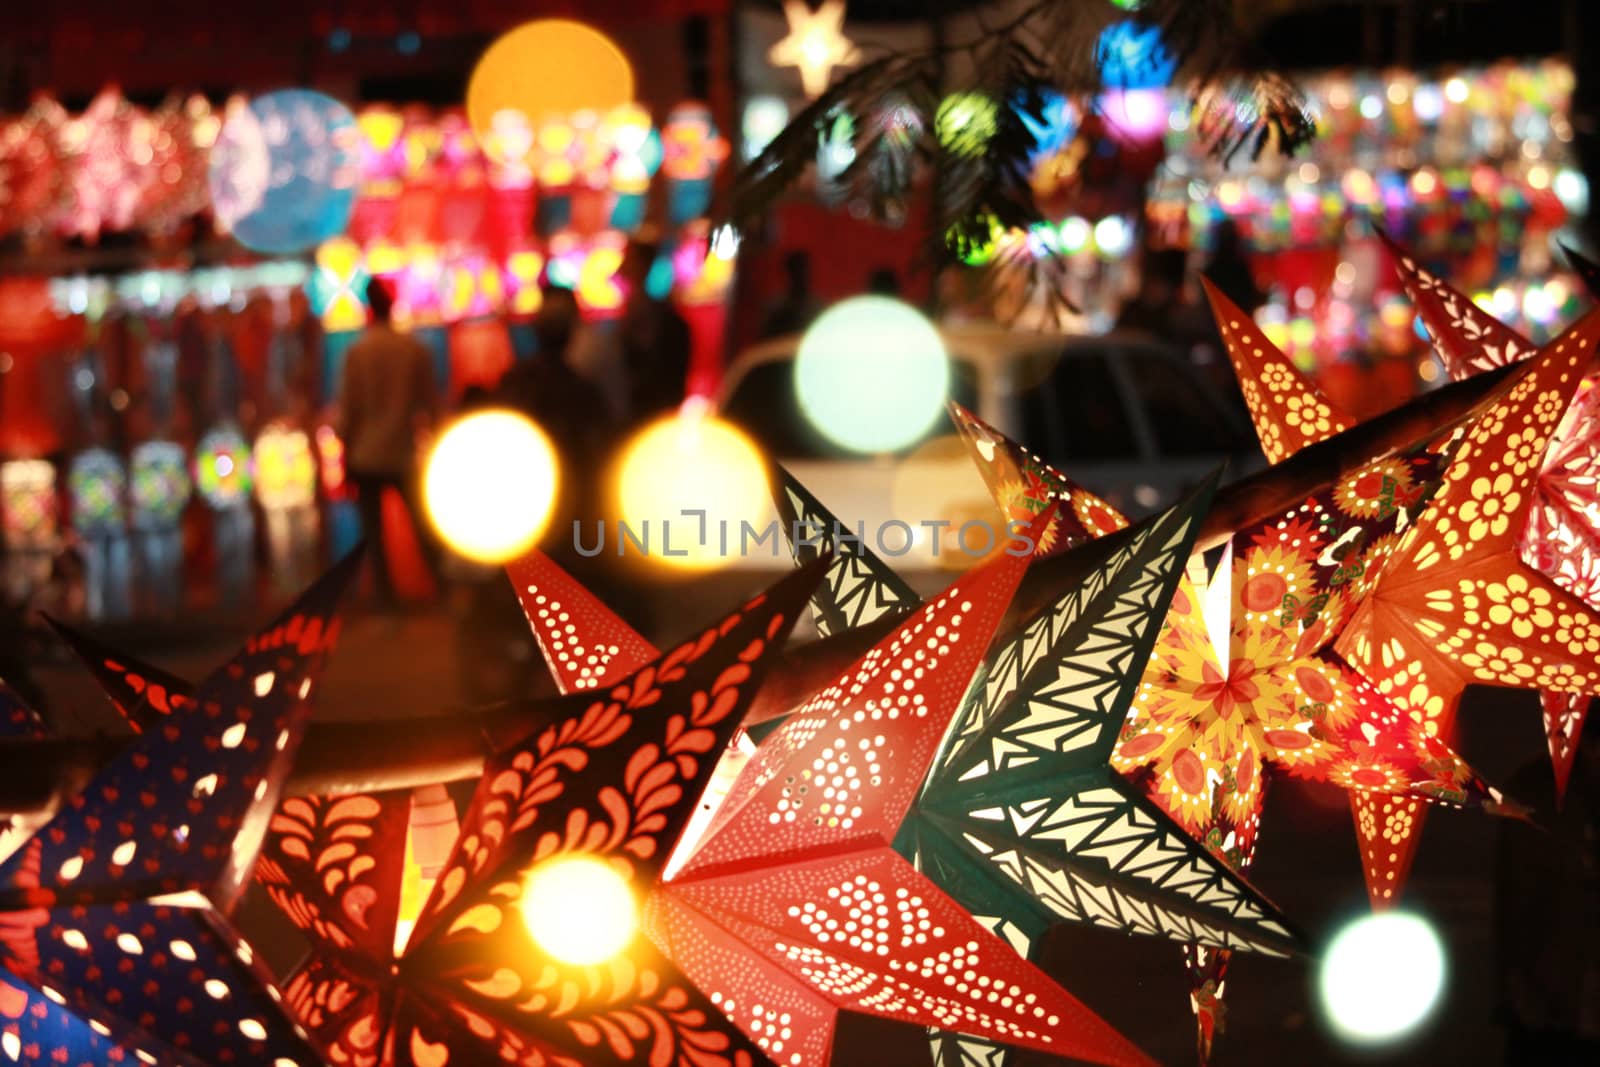 An abstract view of the Diwali street in Pune, India which is full of beautiful traditional lantern shops for the festival.